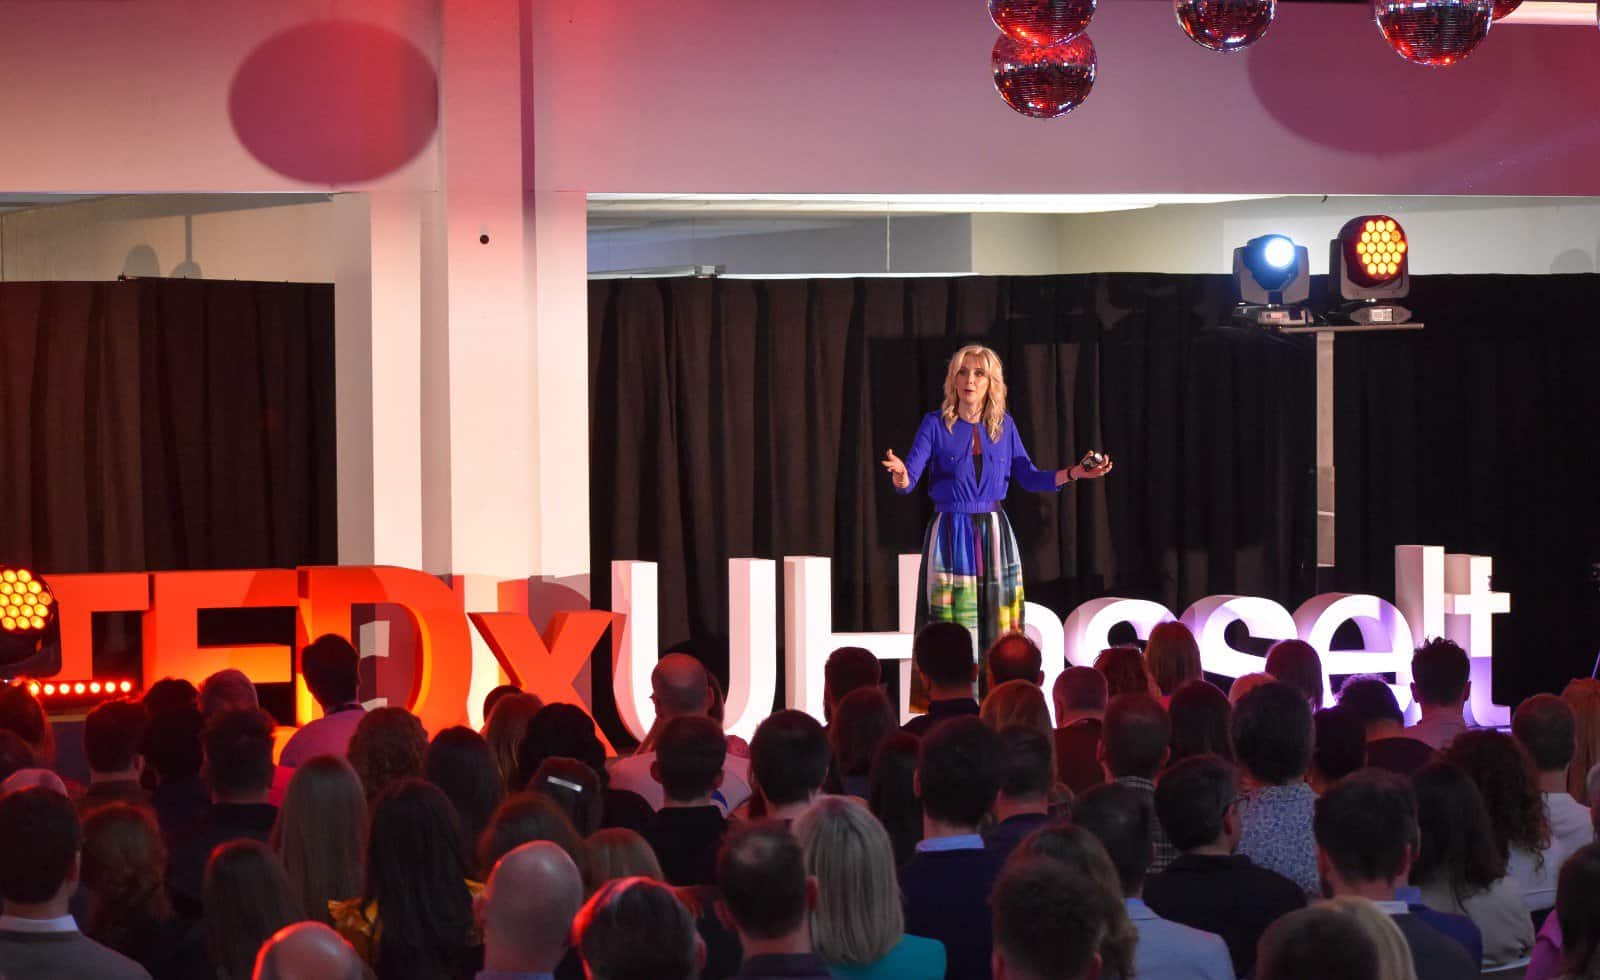 TEDx by Elke Geraerts: The New Now